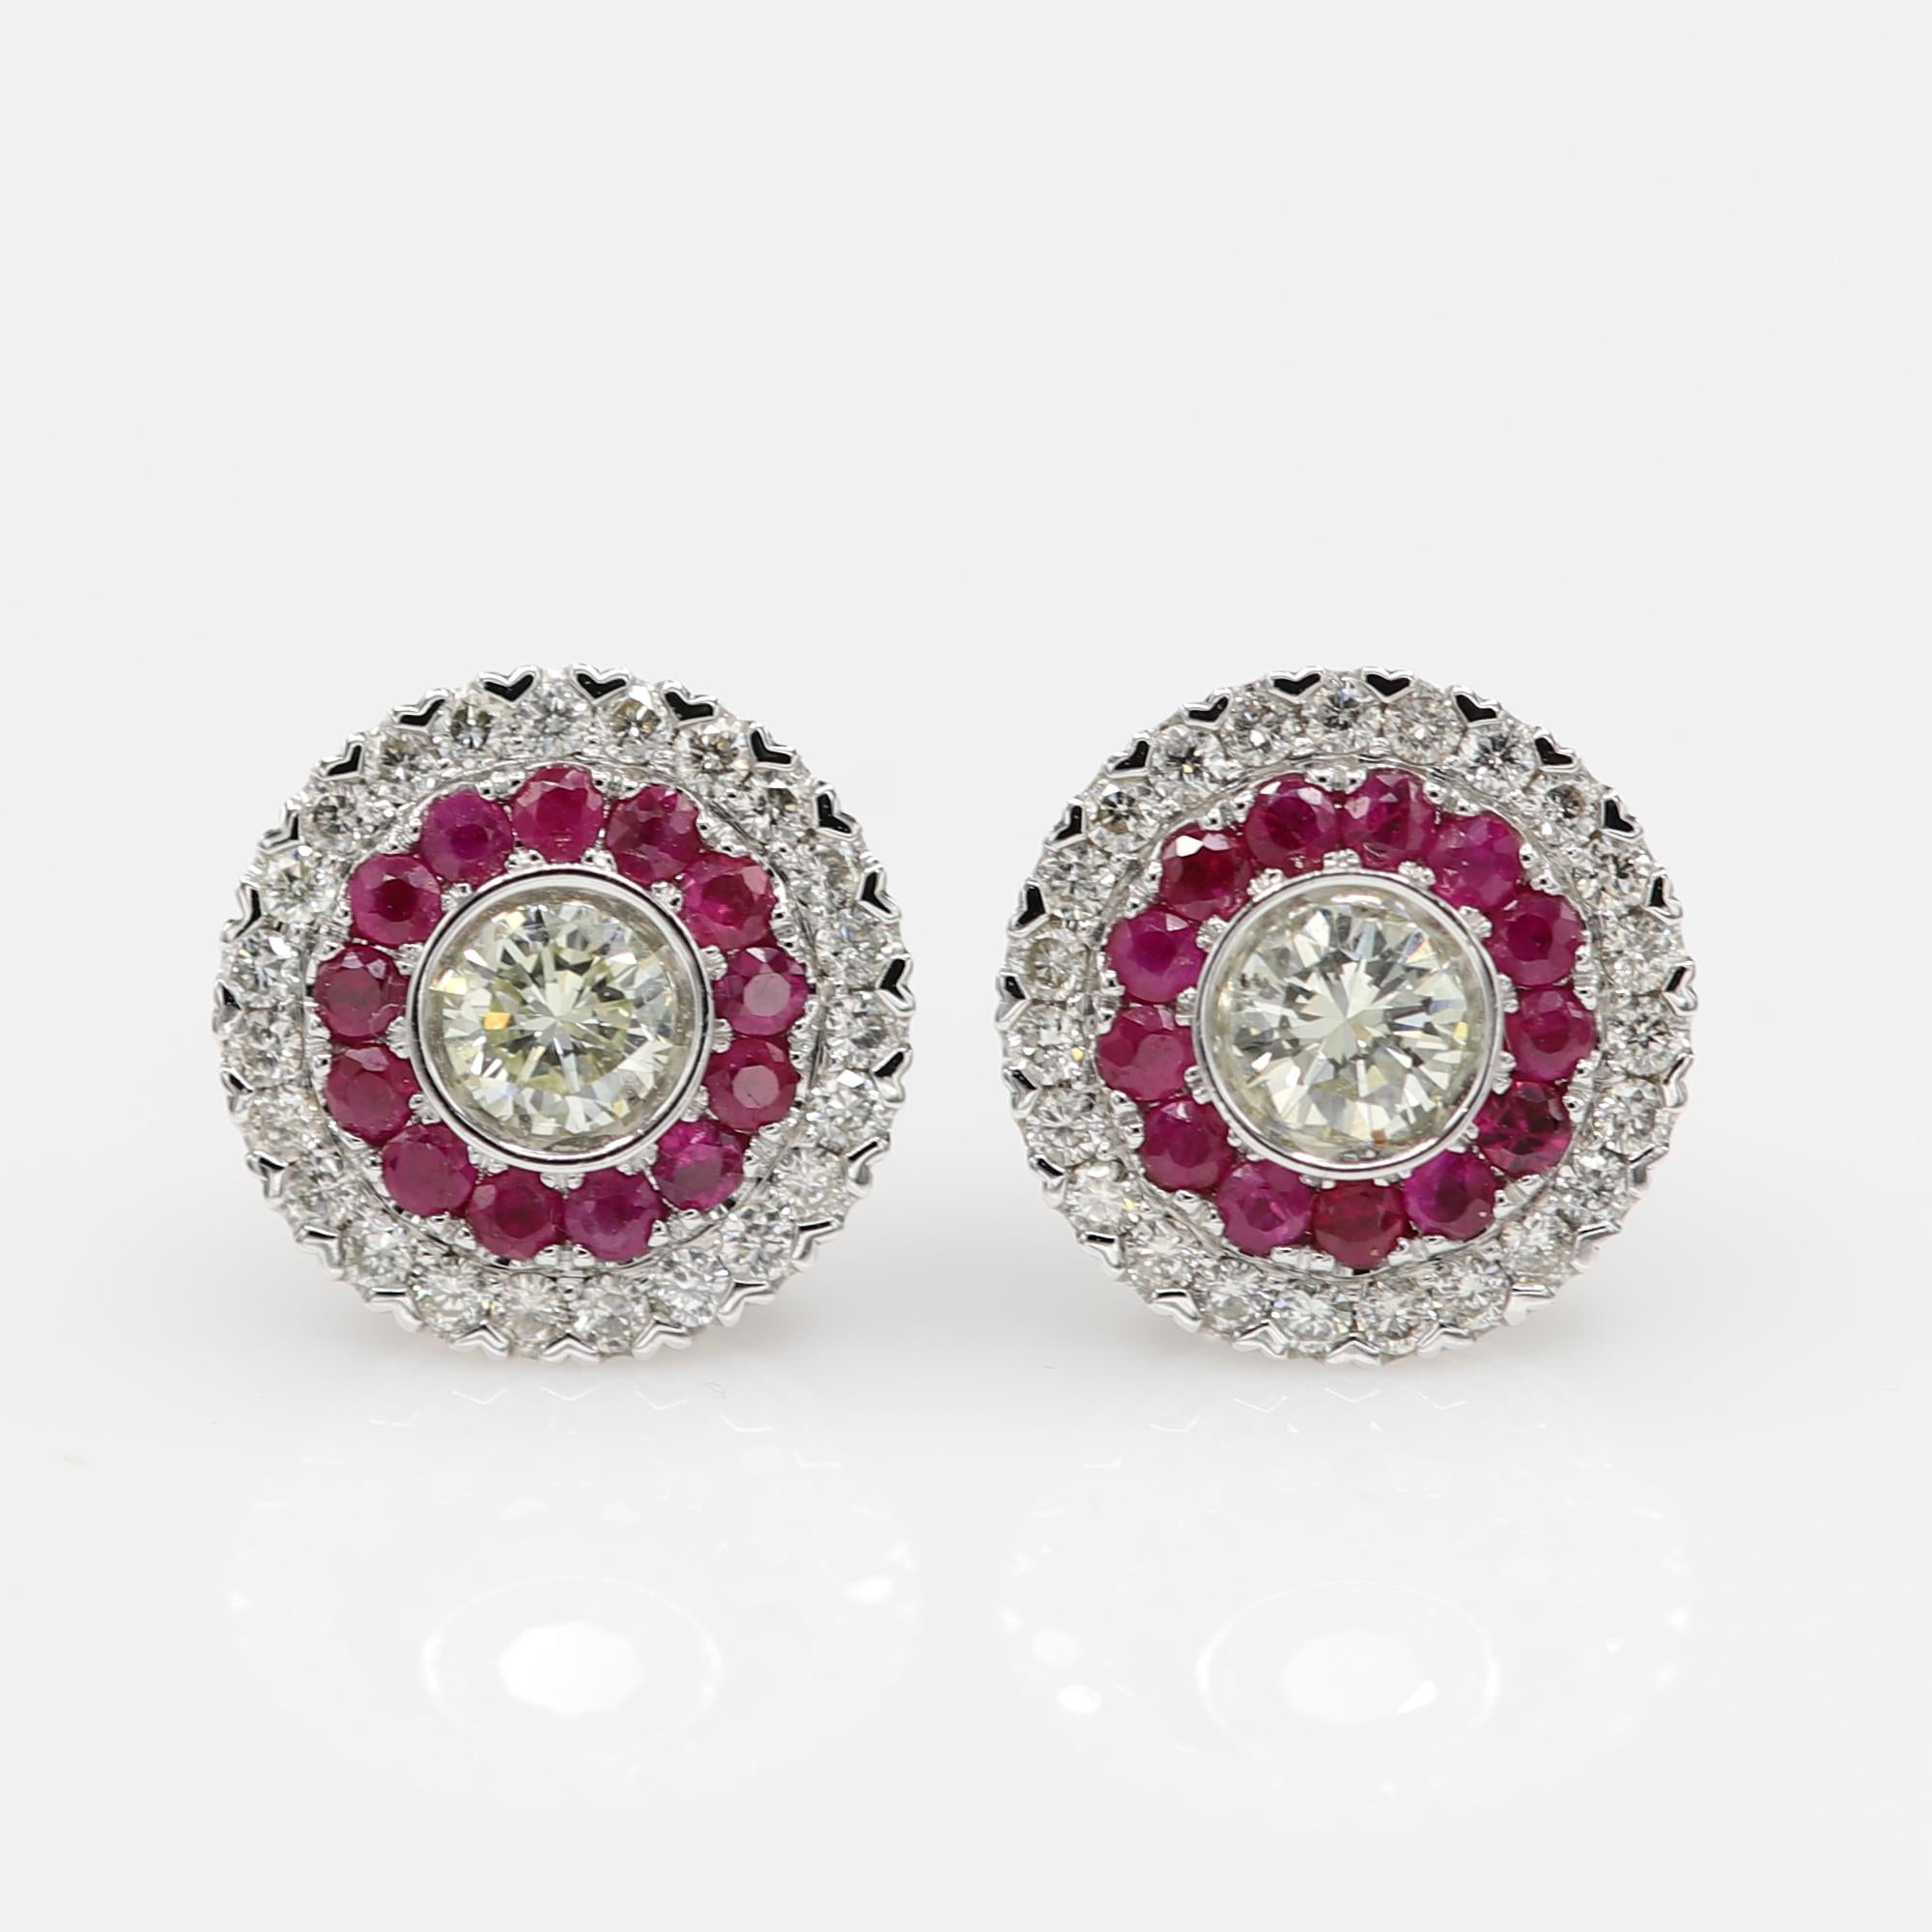 Brilliant Art Deco Style Earrings. 18k White Gold 4.20 grams. Total all Diamonds 0.98 carat GH-SI.
Total  Ruby 0.63 carat.  diameter size approx 12 mm. Push Back type of closure.
All stones are Natural.